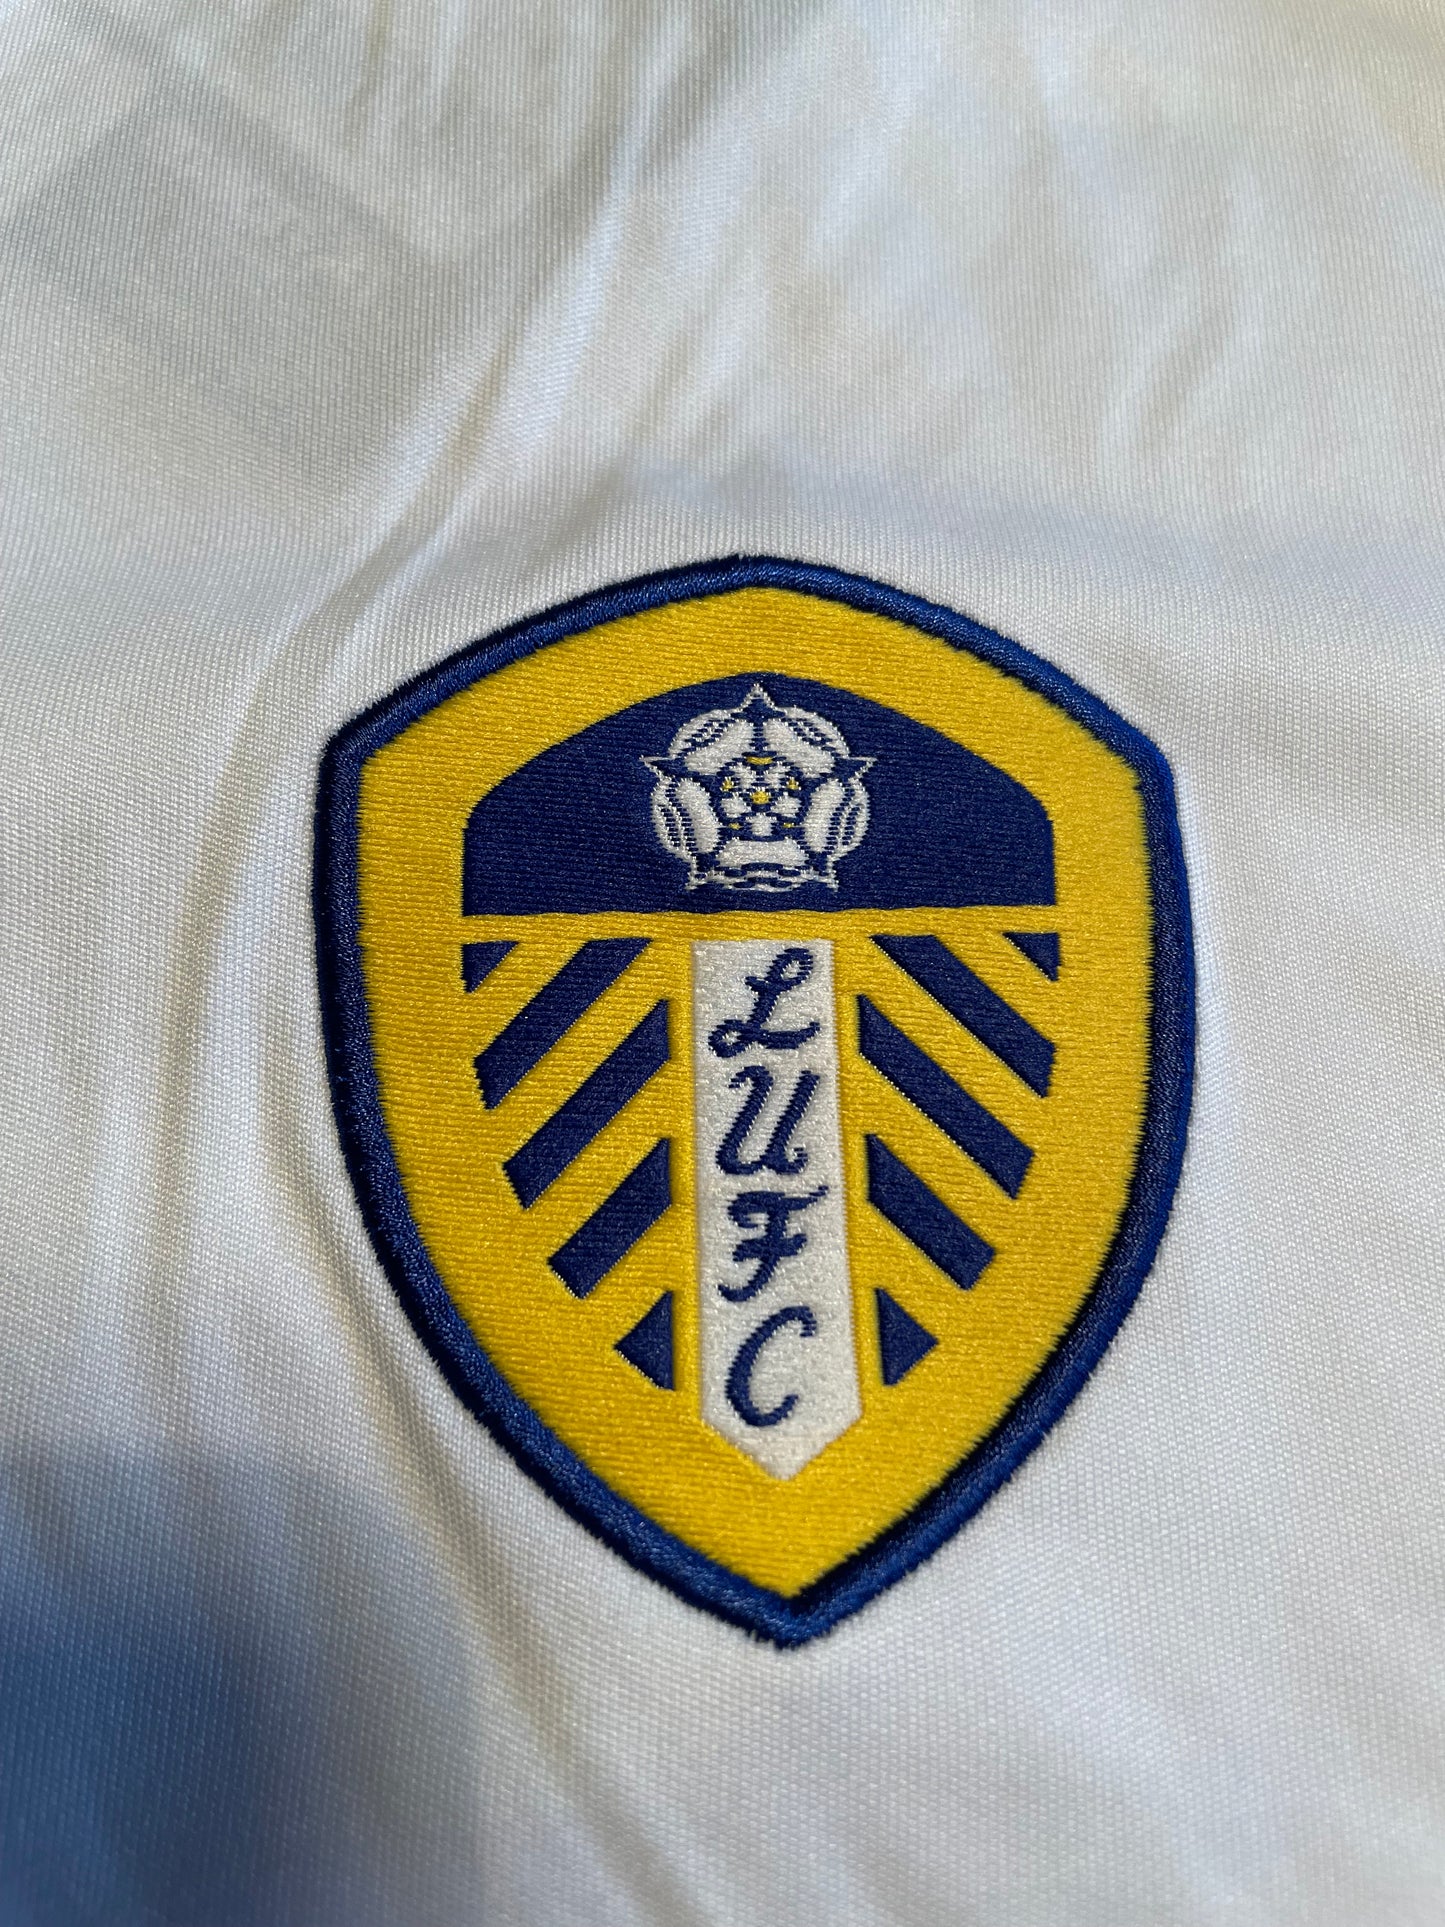 Leeds United 2014 Home Shirt (excellent) Adults 2XL. Height 27.5 inches